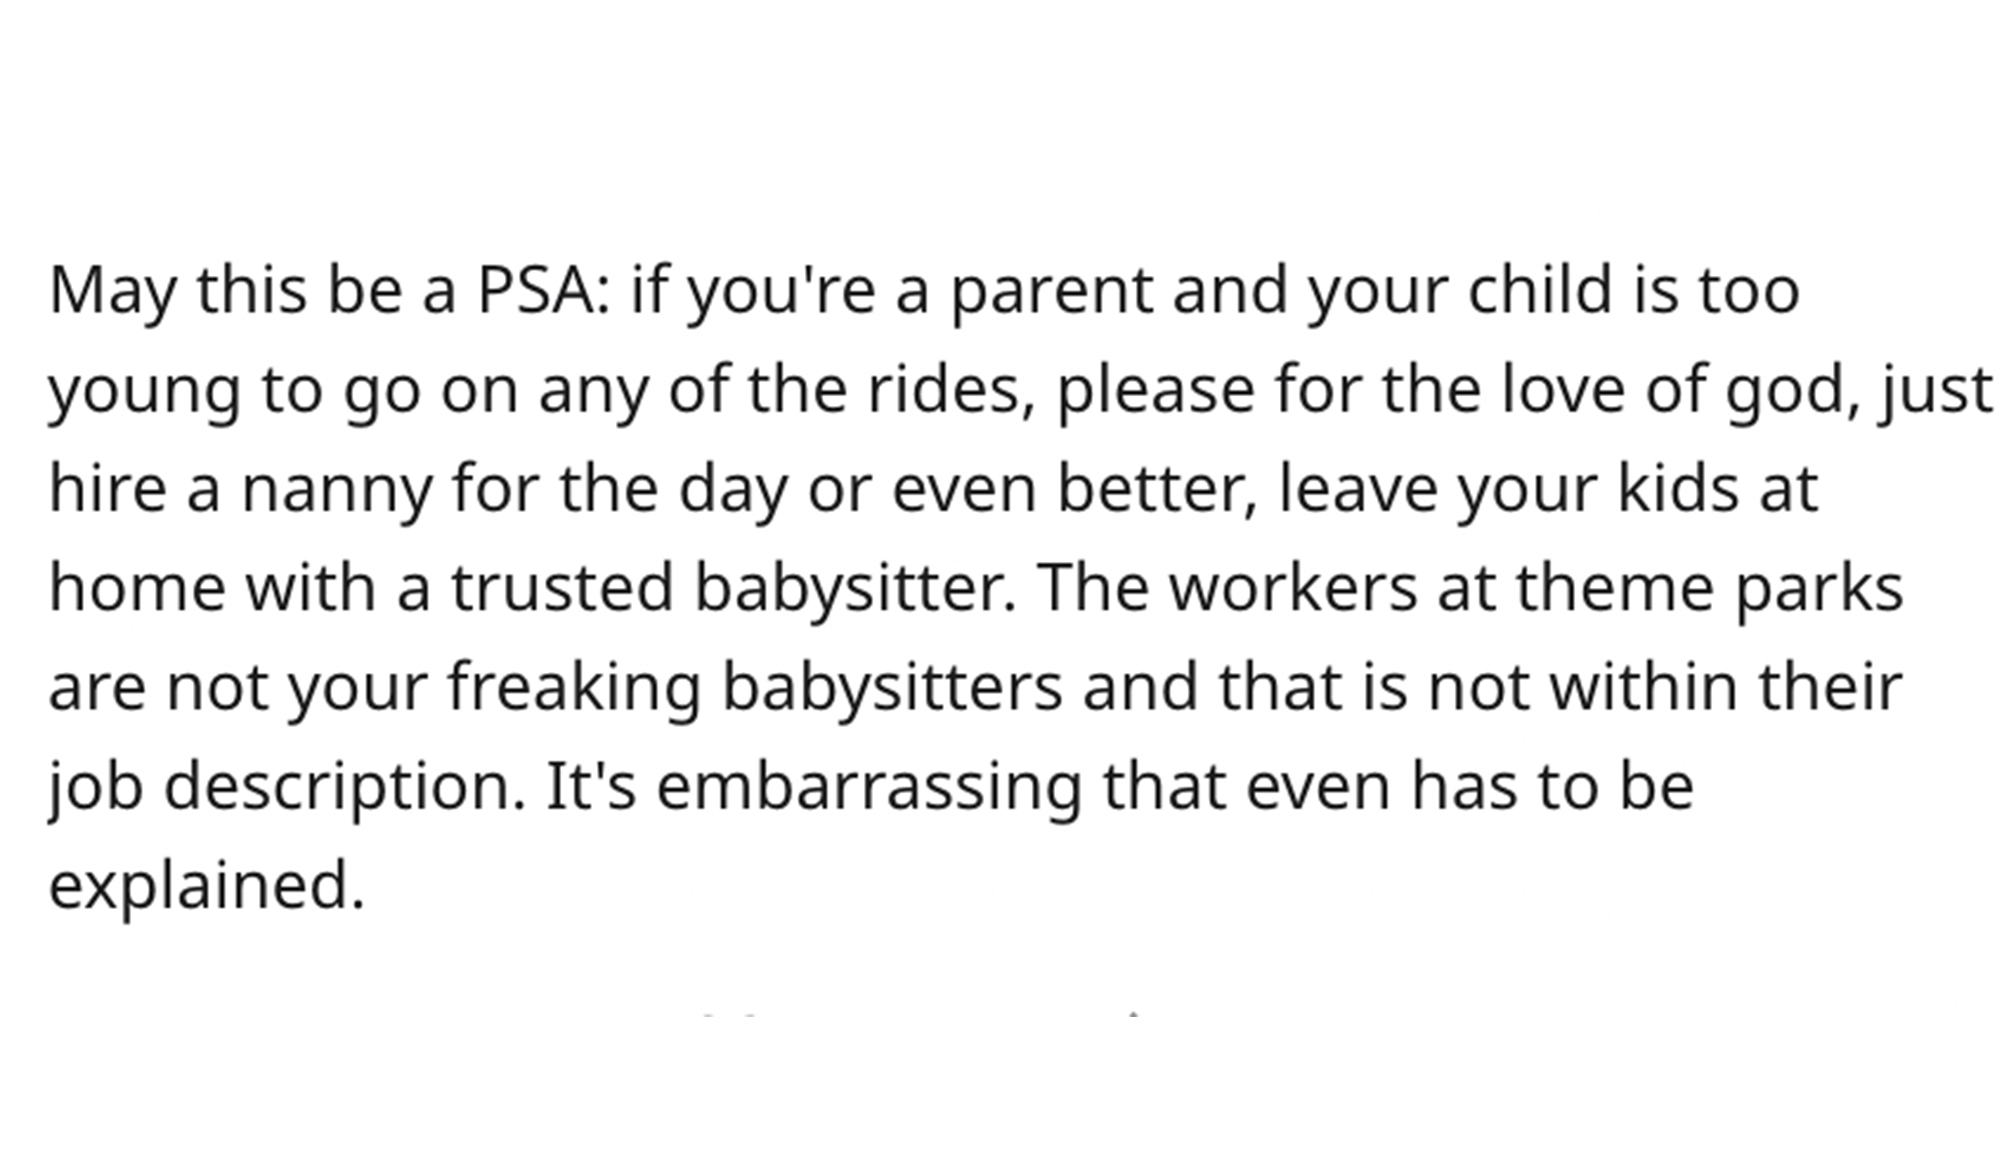 Entitled Parents at Six Flags - document - May this be a Psa if you're a parent and your child is too young to go on any of the rides, please for the love of god, just hire a nanny for the day or even better, leave your kids at home with a trusted babysit